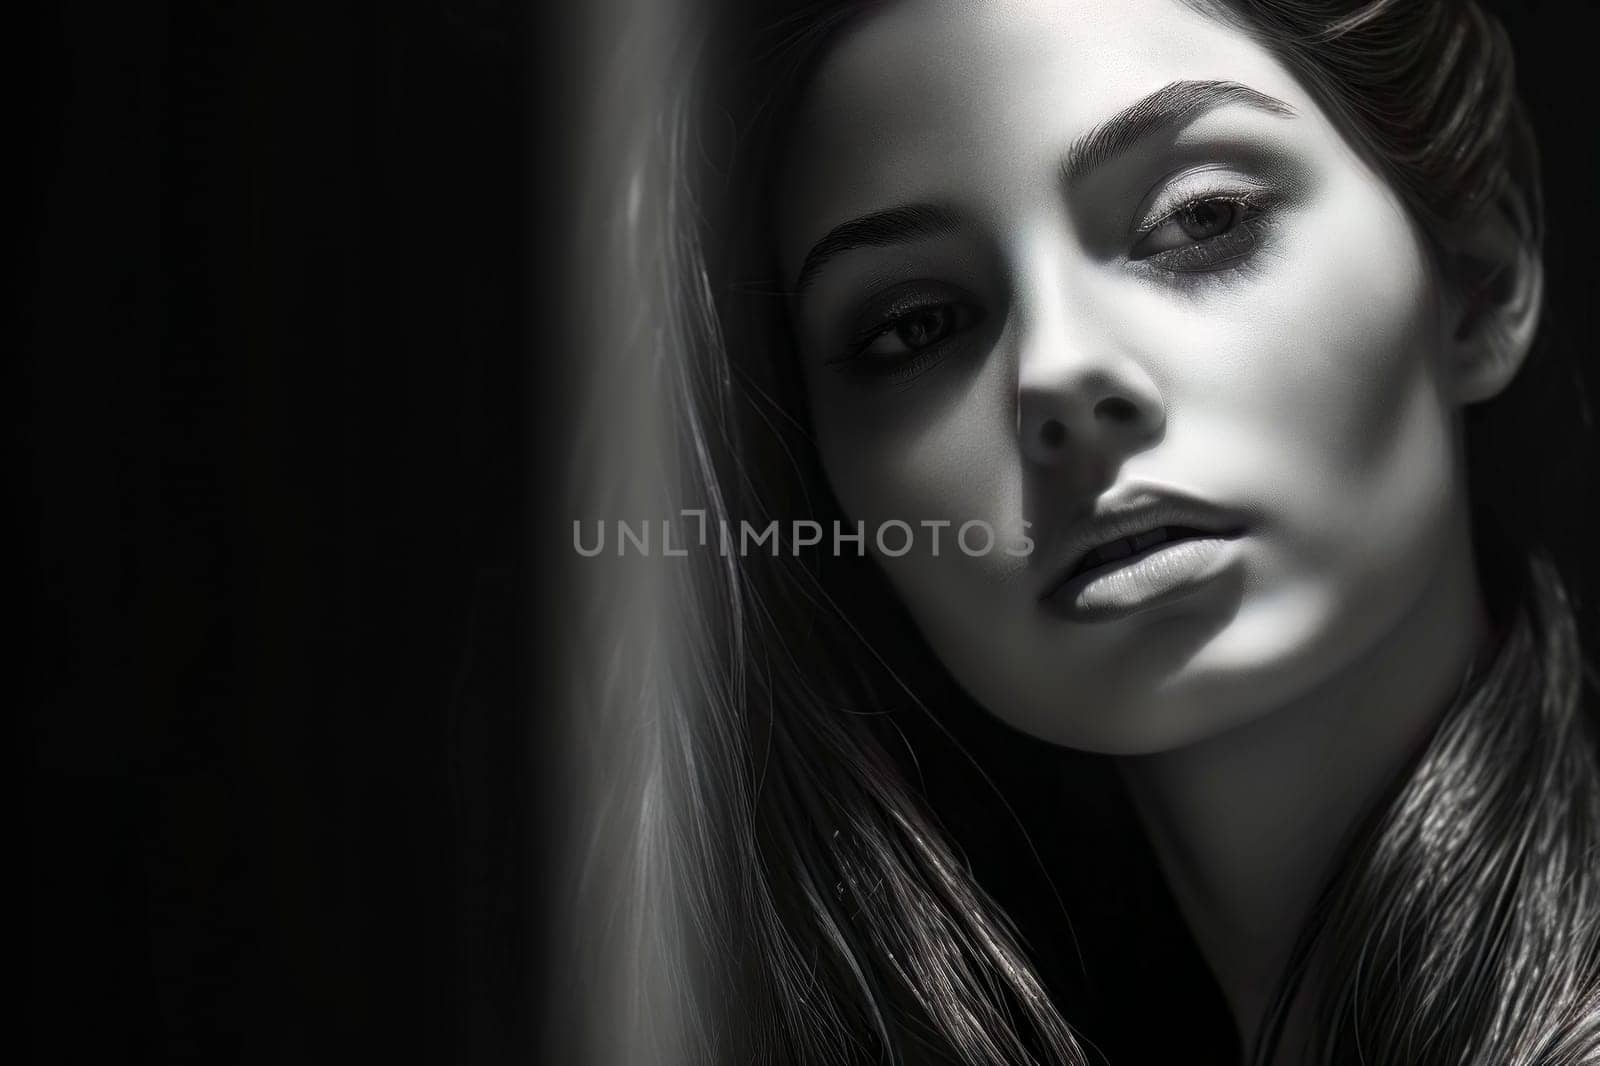 Capture the timeless beauty of a sweet girl in a captivating black and white portrait.